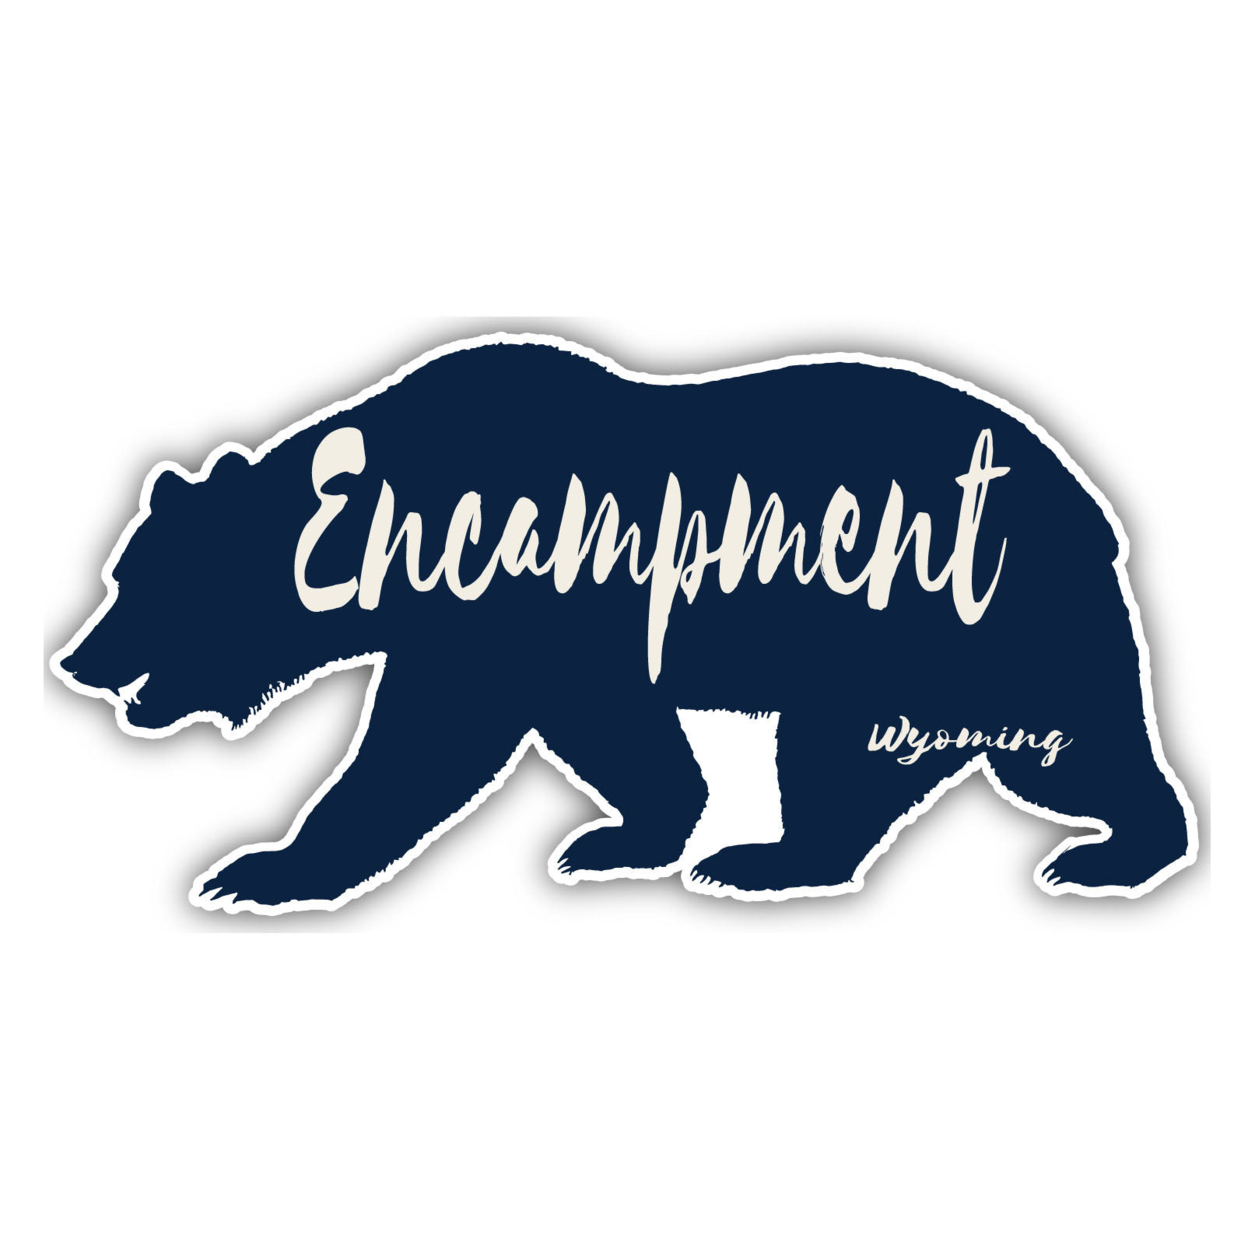 Encampment Wyoming Souvenir Decorative Stickers (Choose Theme And Size) - 4-Pack, 6-Inch, Bear